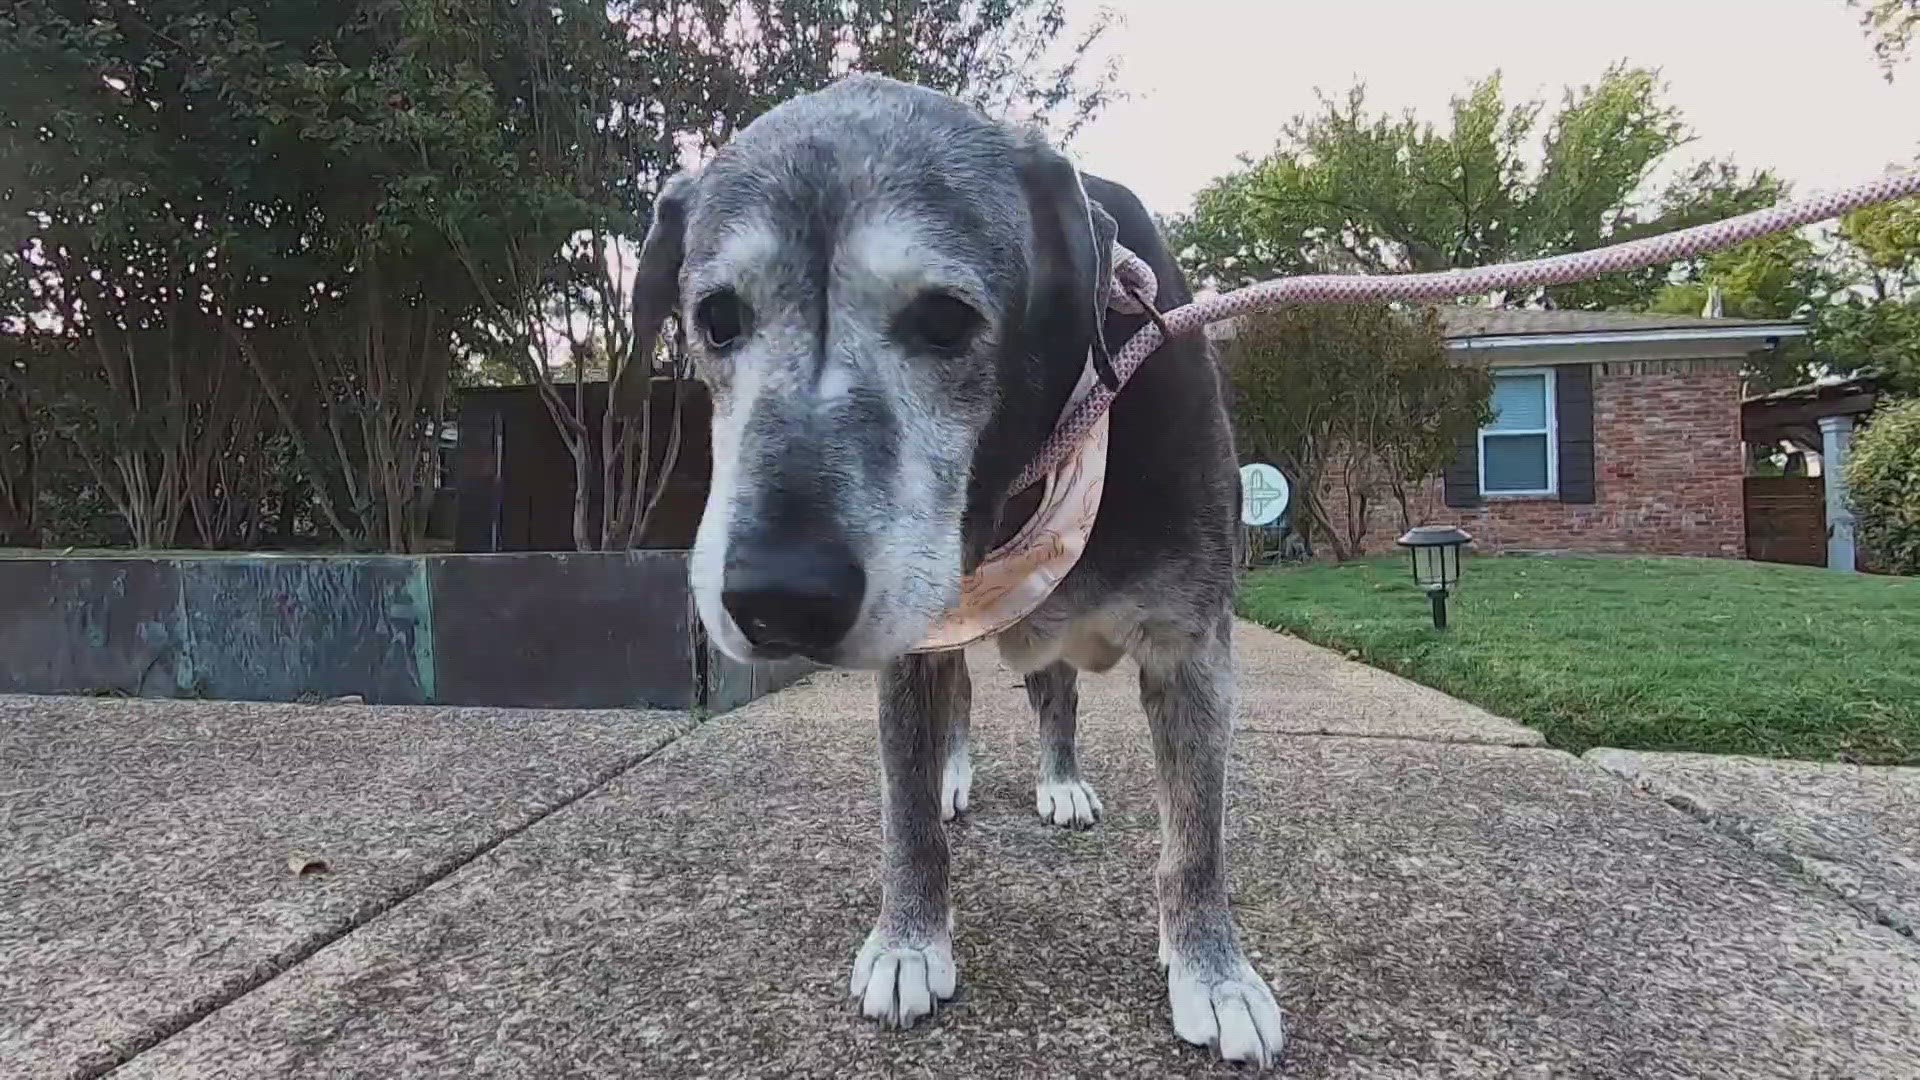 Annie died a day after her 20th birthday party. She was adopted at 19 years old after being surrendered to a Dallas shelter.